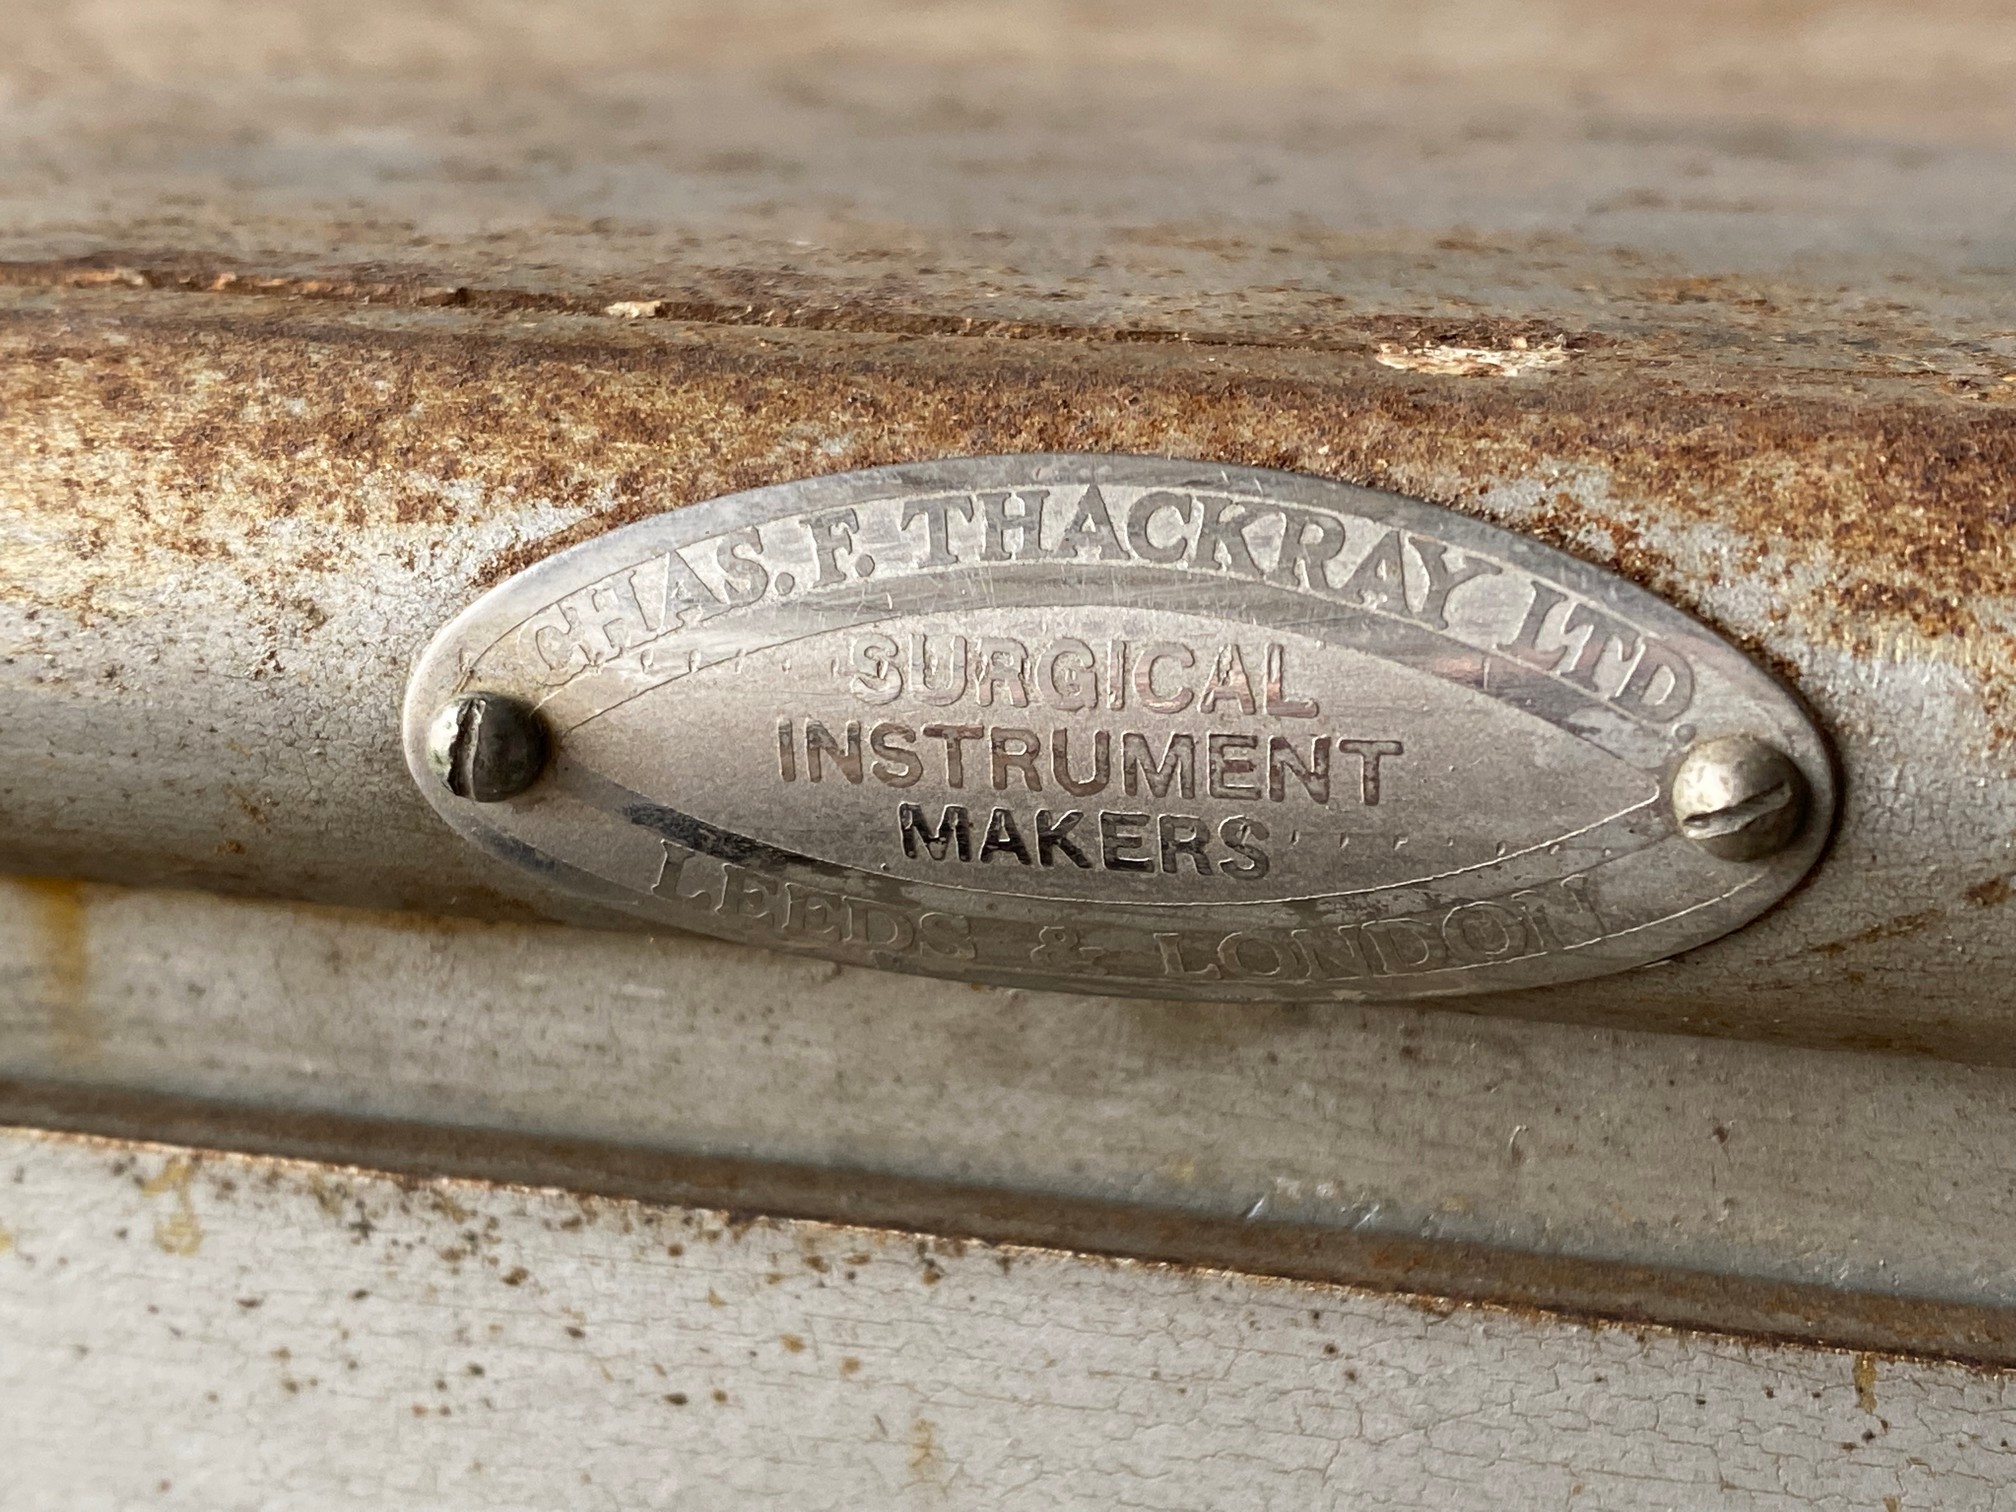 A Chas. F. Thackray Ltd surgical instrument cabinet, 31" w x 60" h x 16 1/2" d. - Image 2 of 2